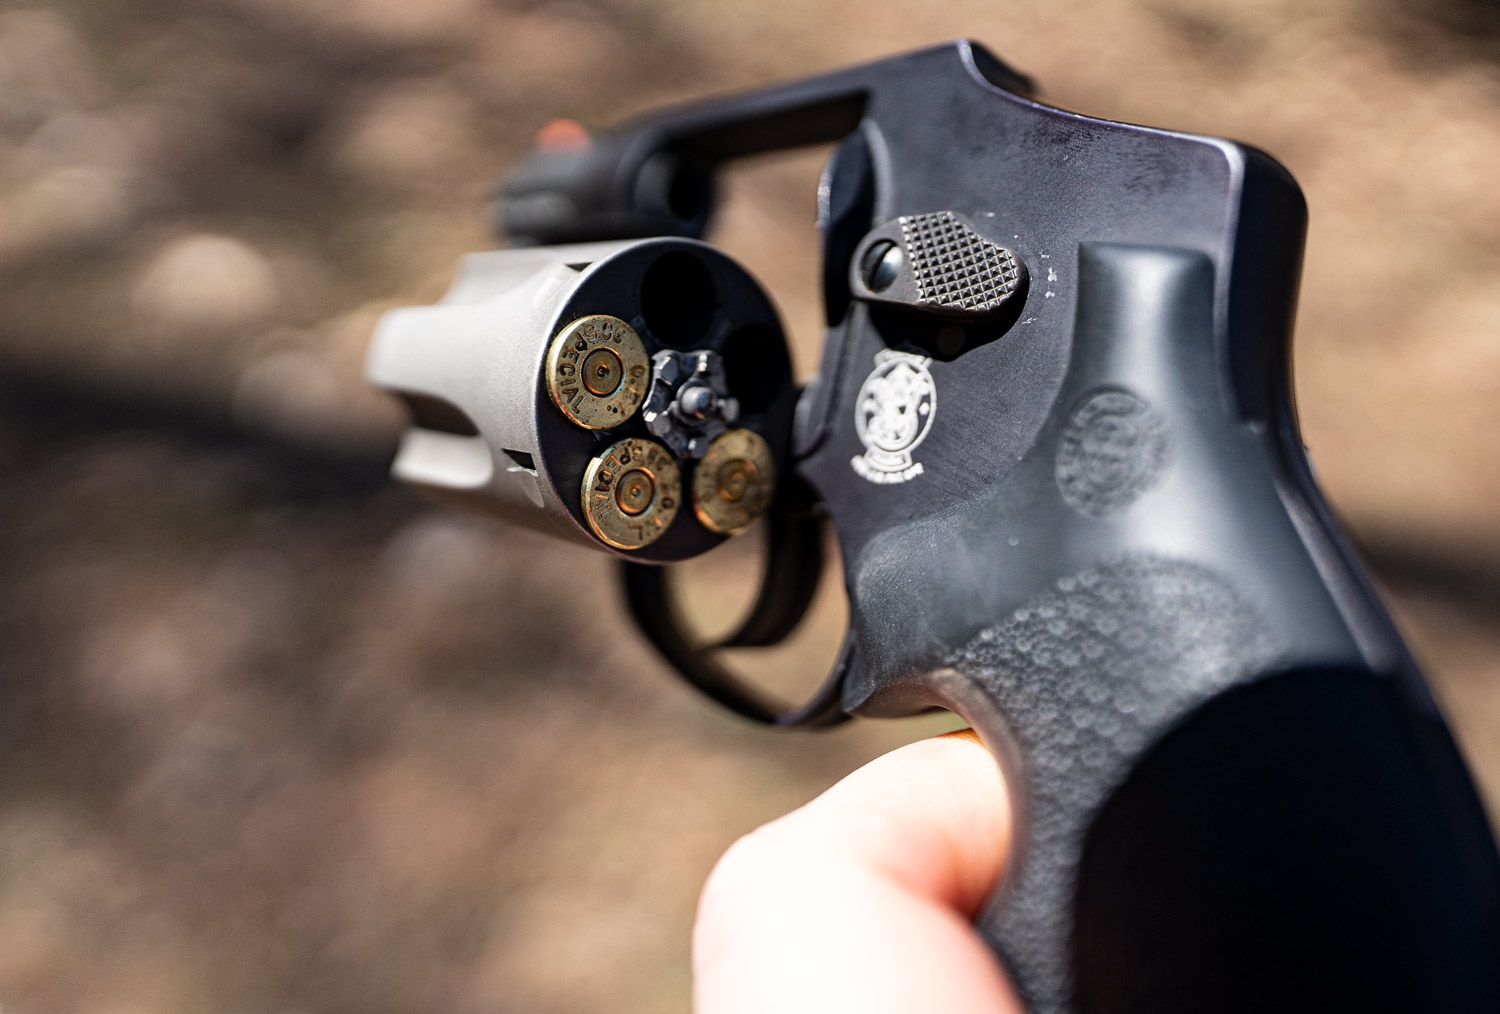 38 S&W vs. 38 Special - What's the Difference?